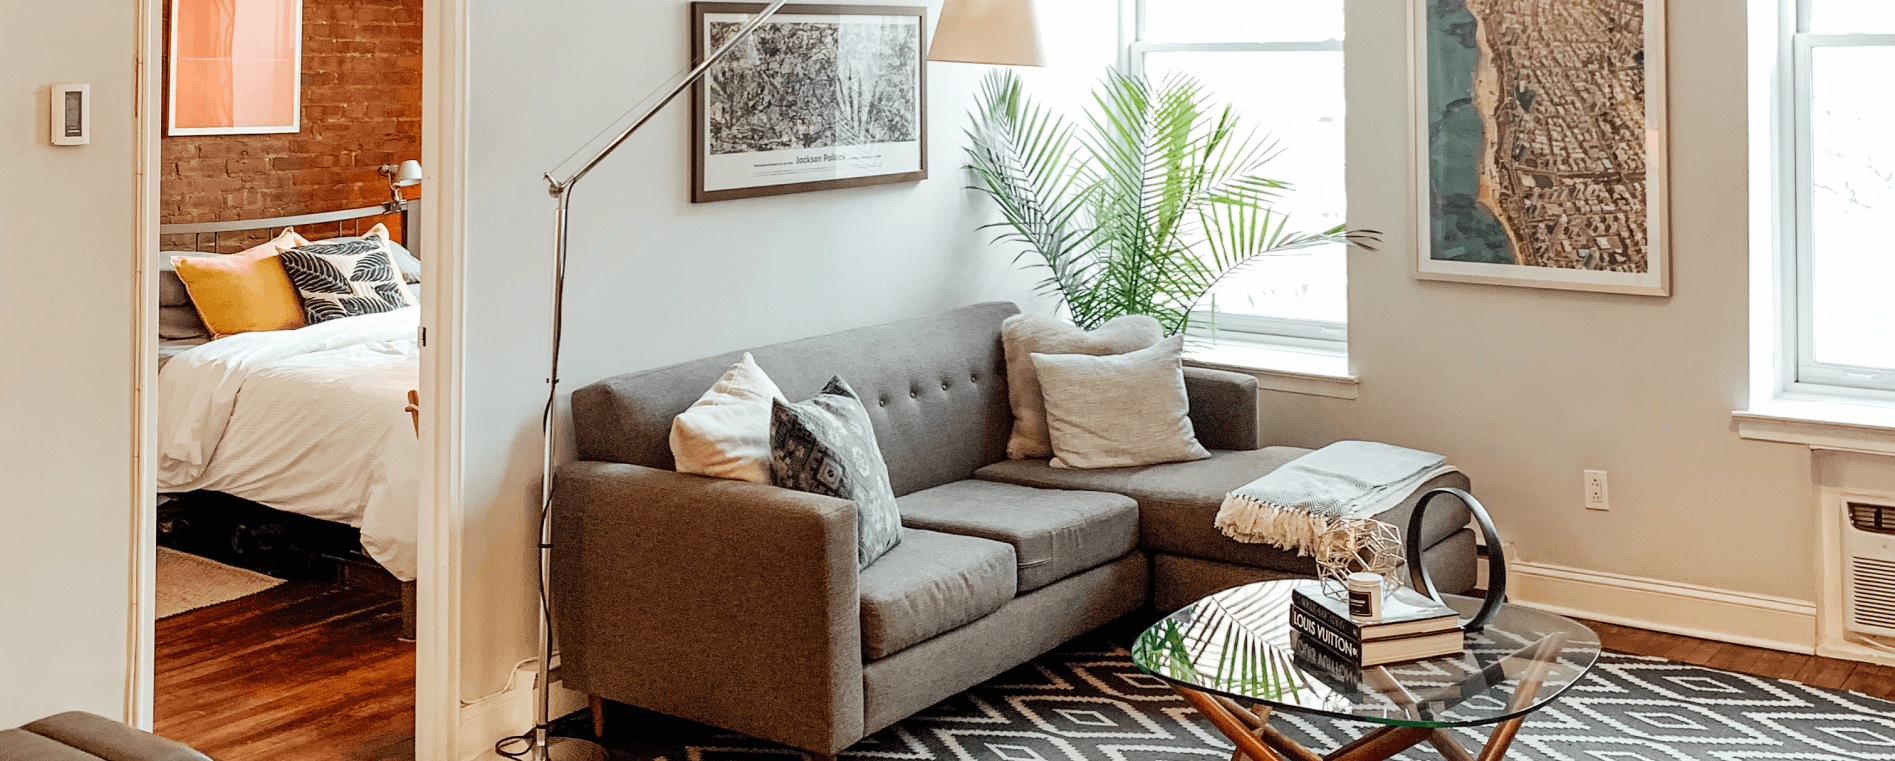 How to Be a Pro at Small Apartment Decorating